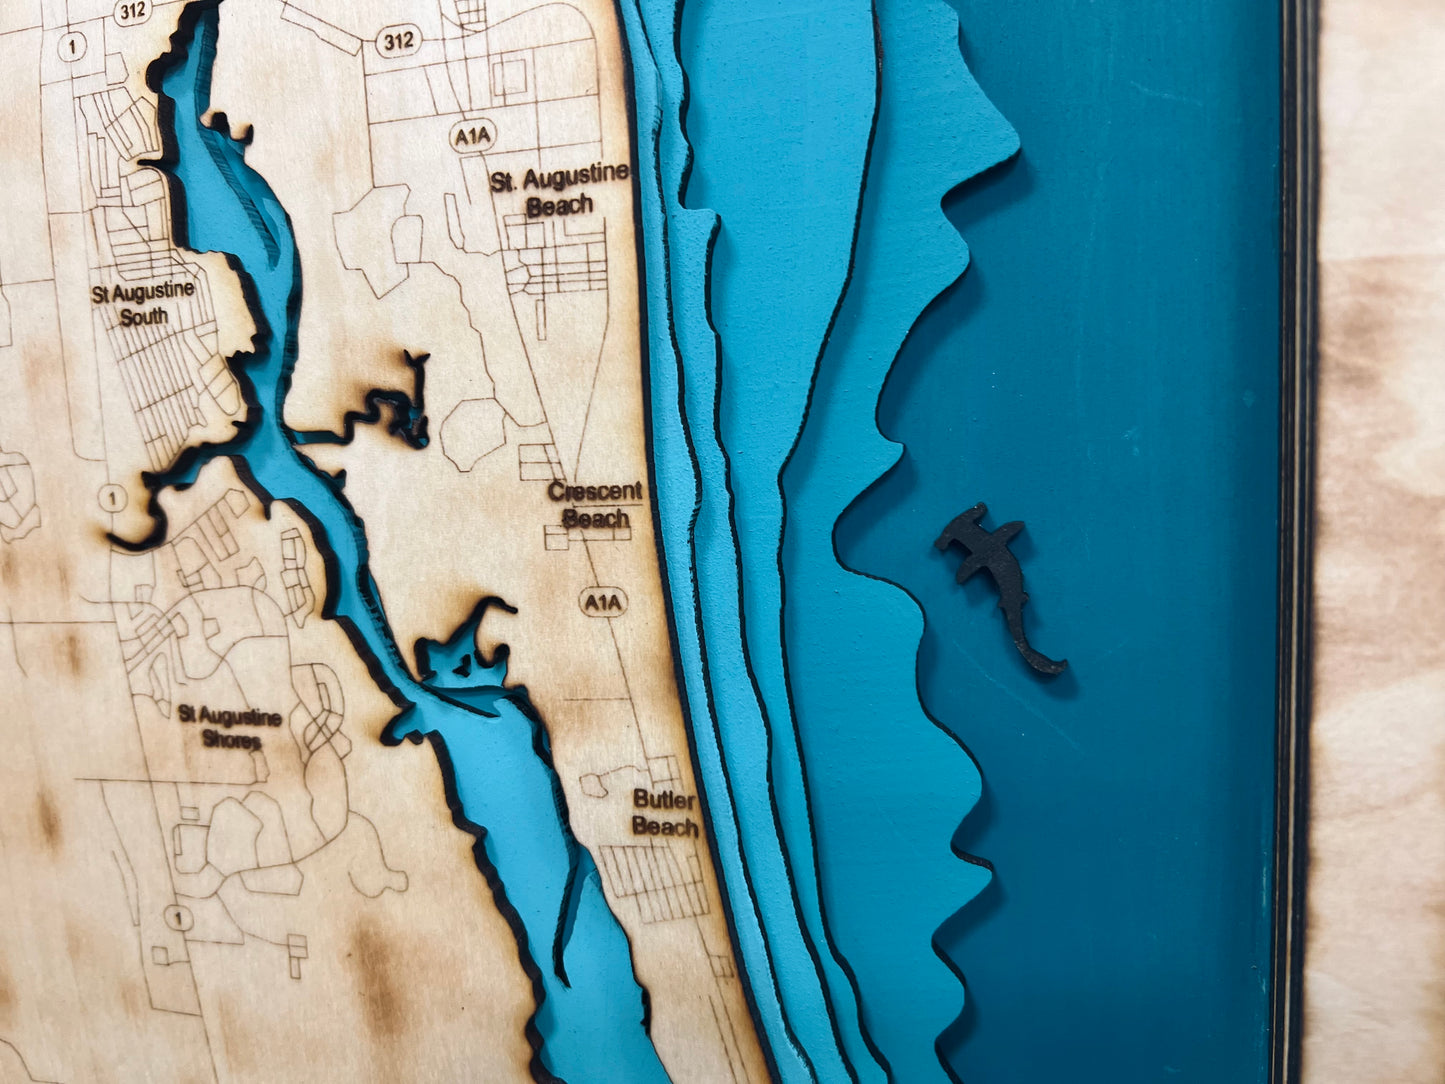 Layered Wood Map {St Augustine South}